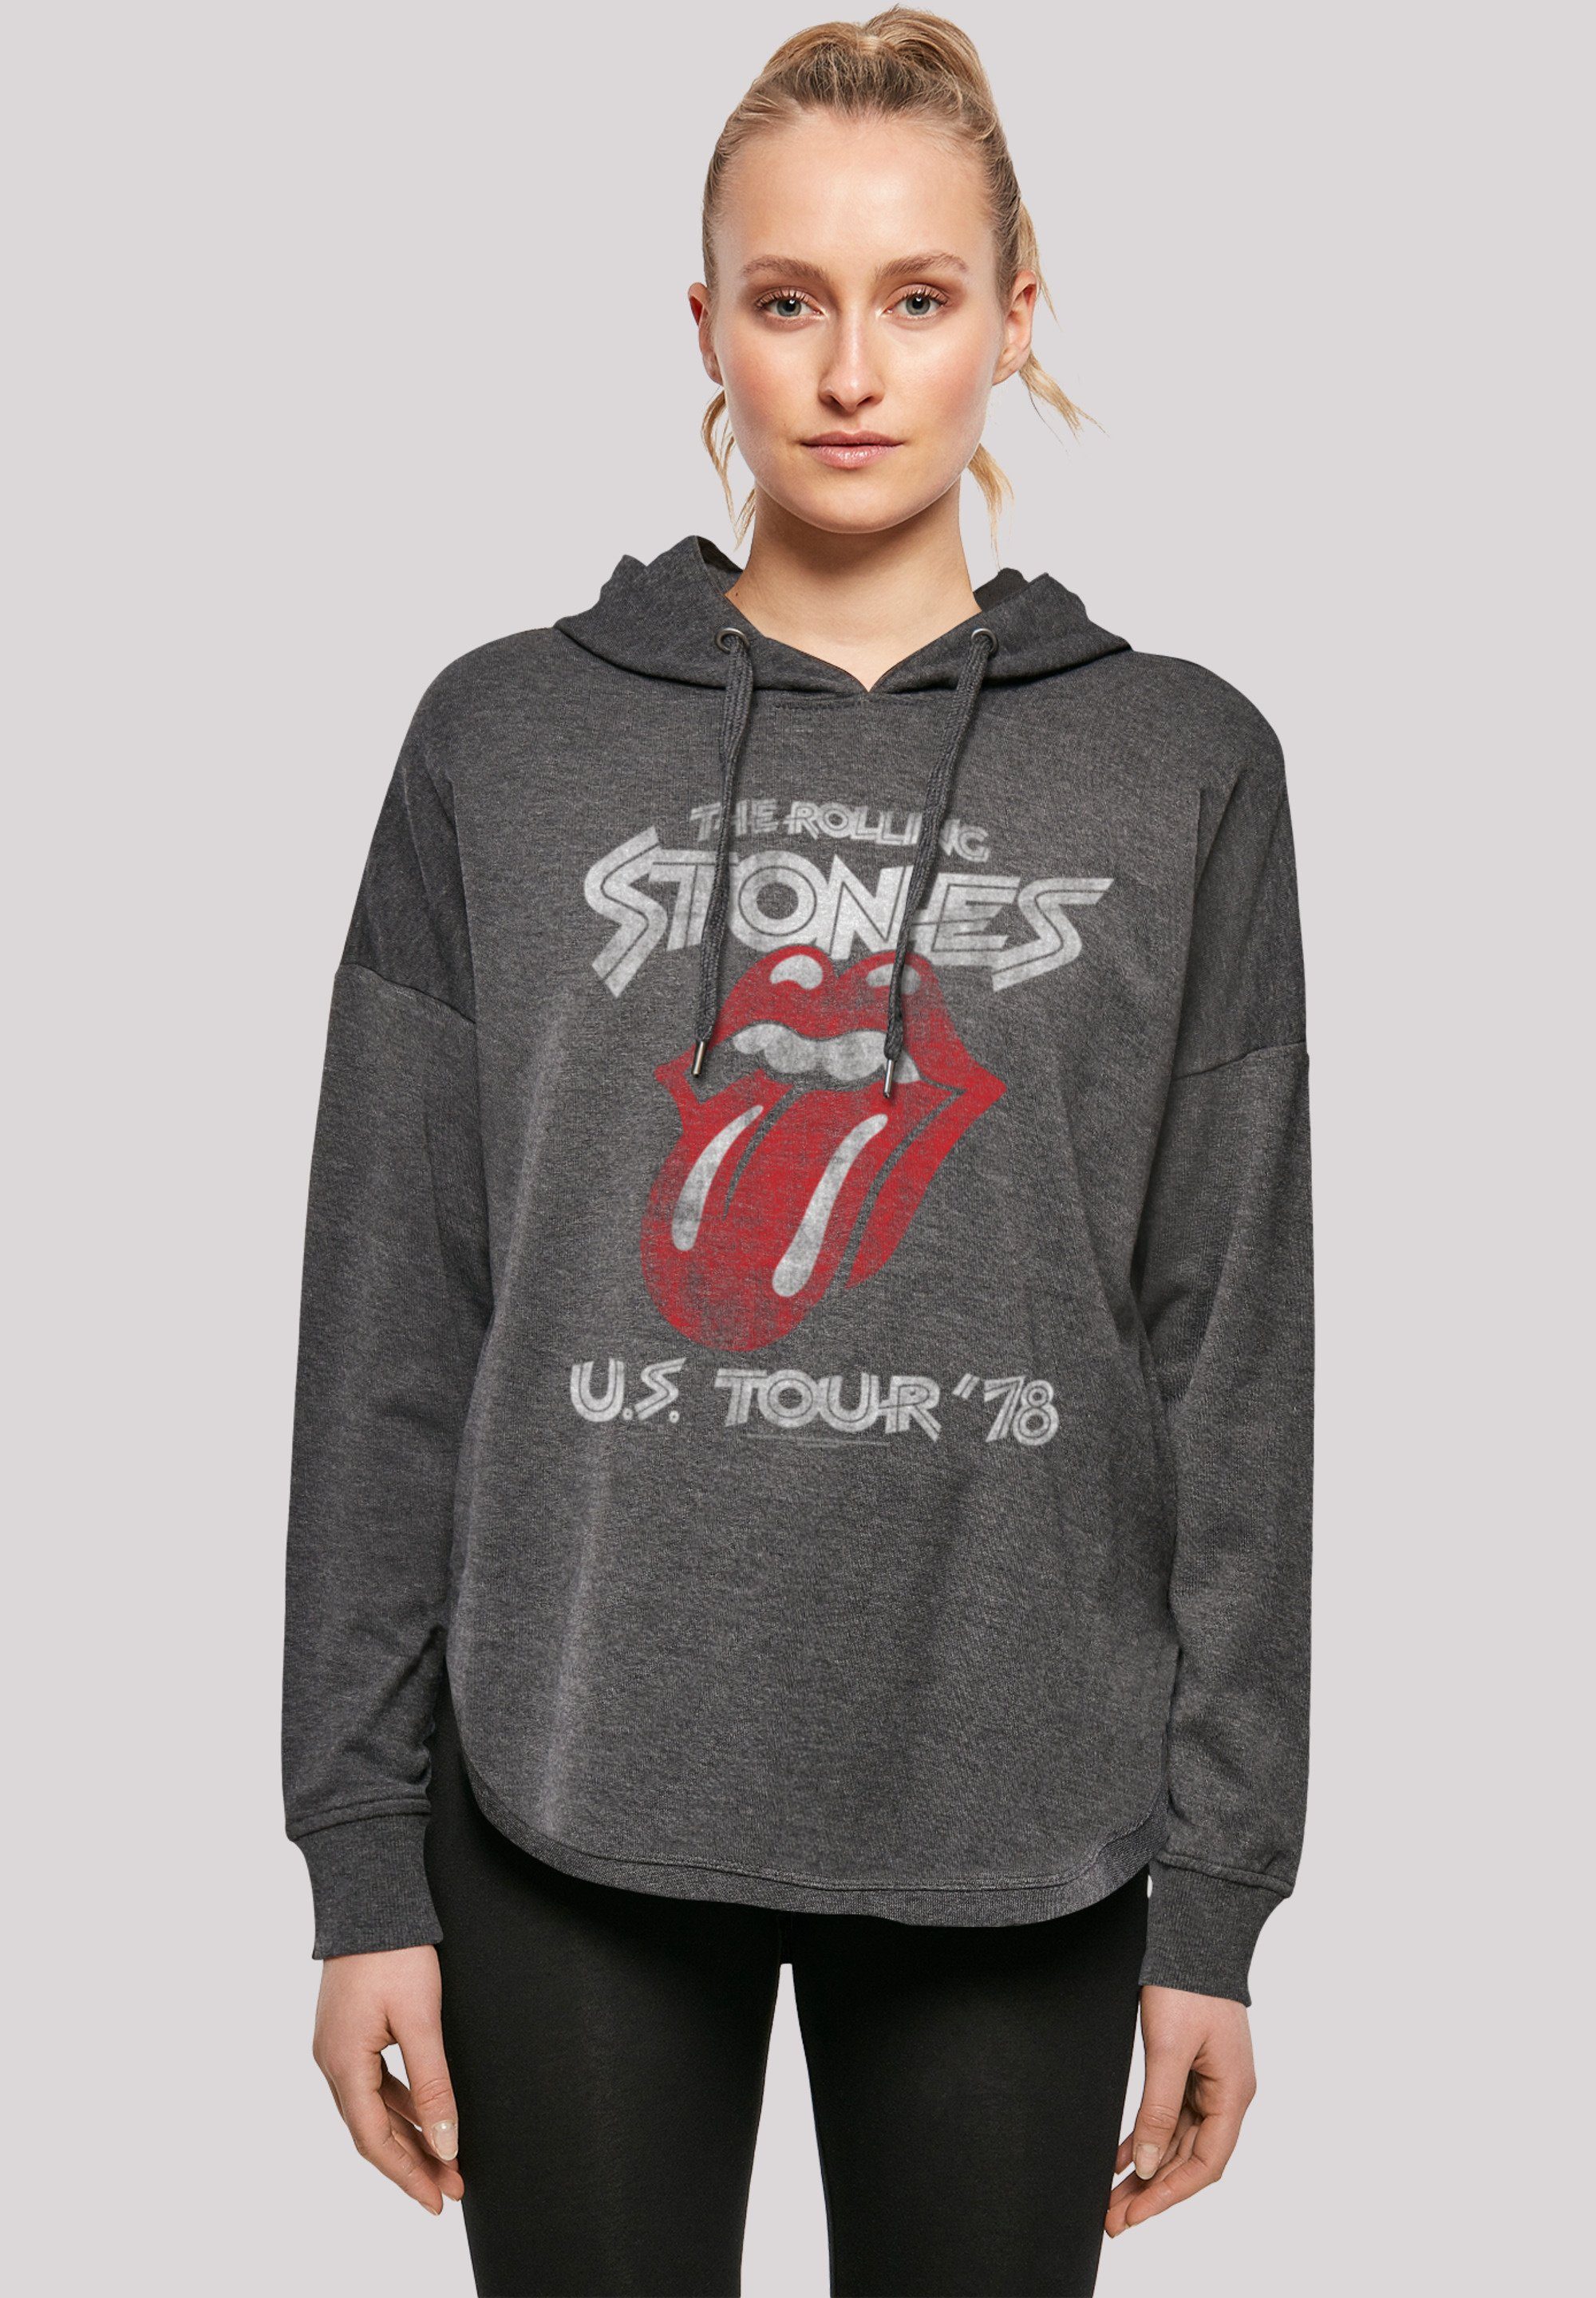 F4NT4STIC Kapuzenpullover The Rolling Stones Rock Band US Tour '78 Print charcoal